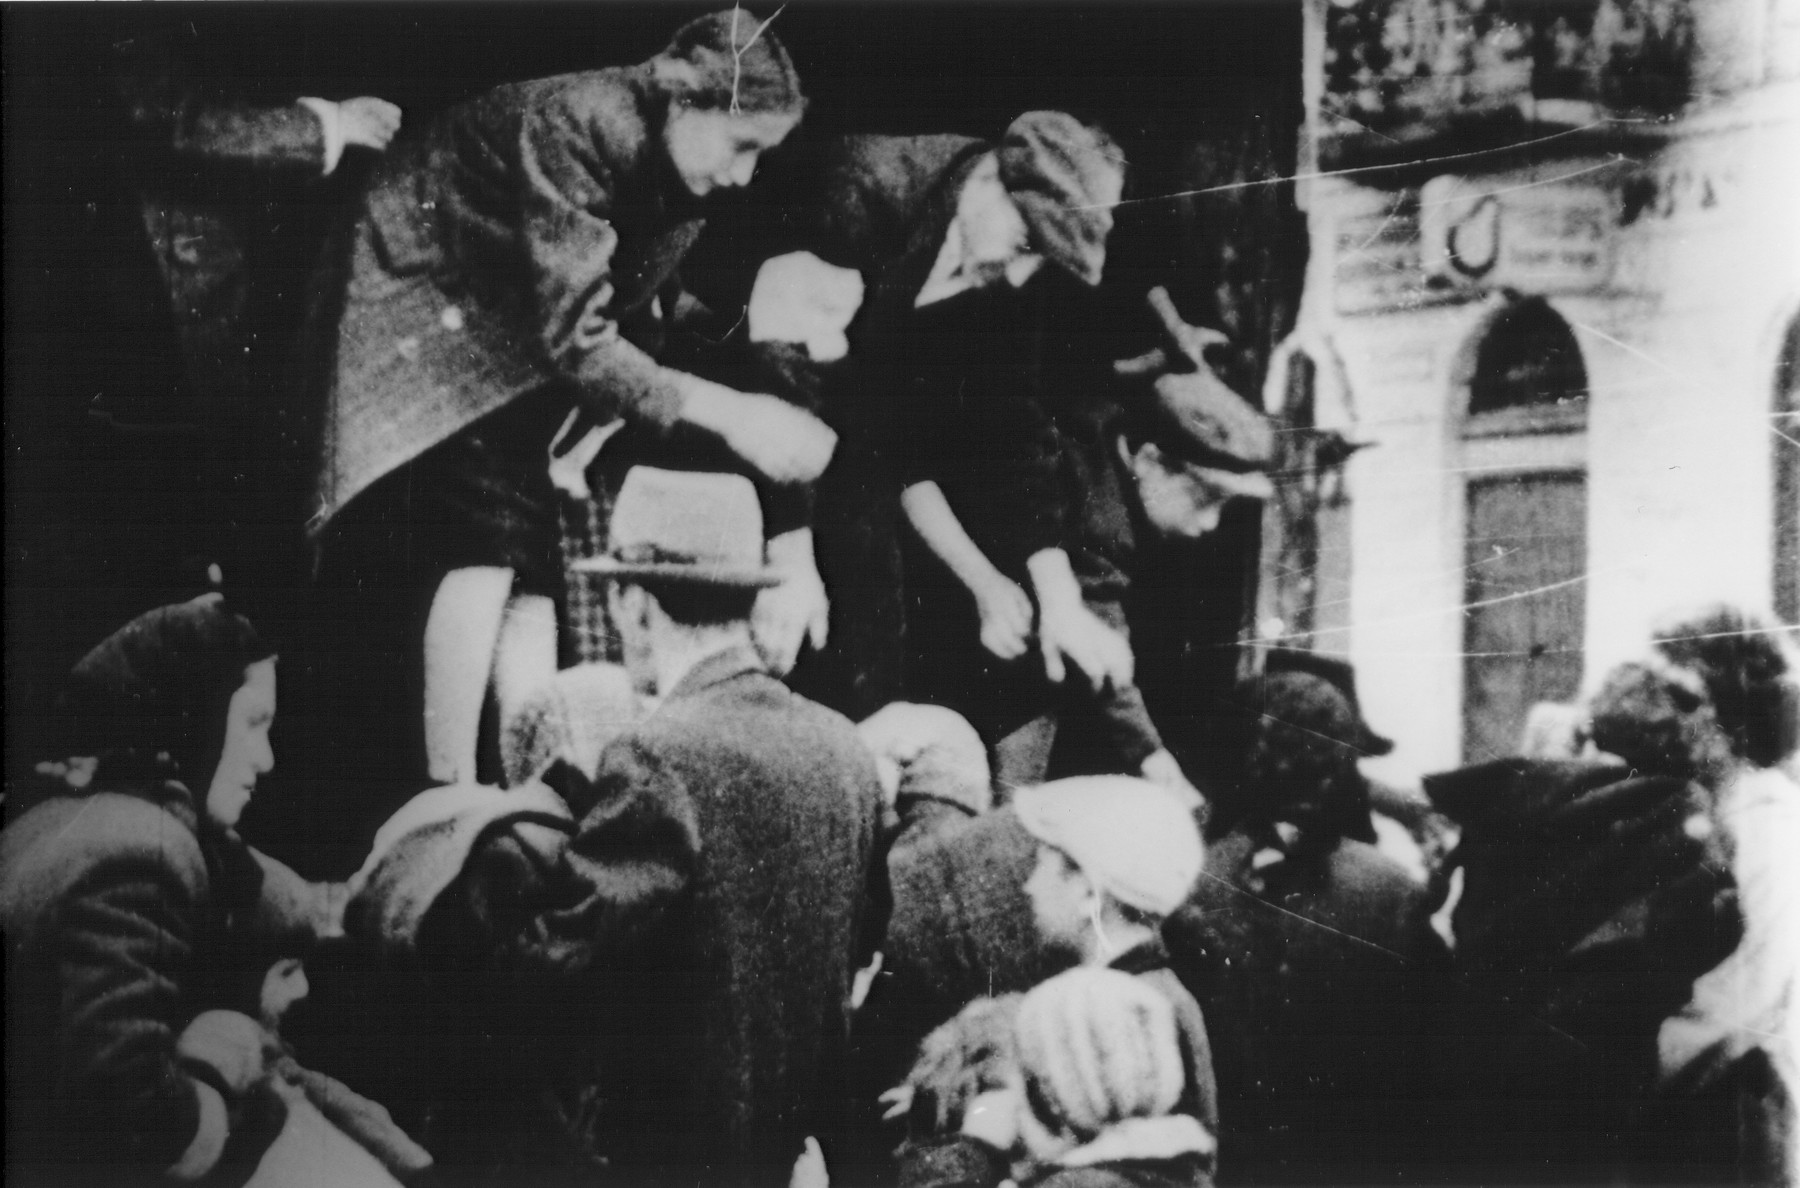 Jews captured by the SS during the suppression of the Warsaw ghetto uprising board a truck.